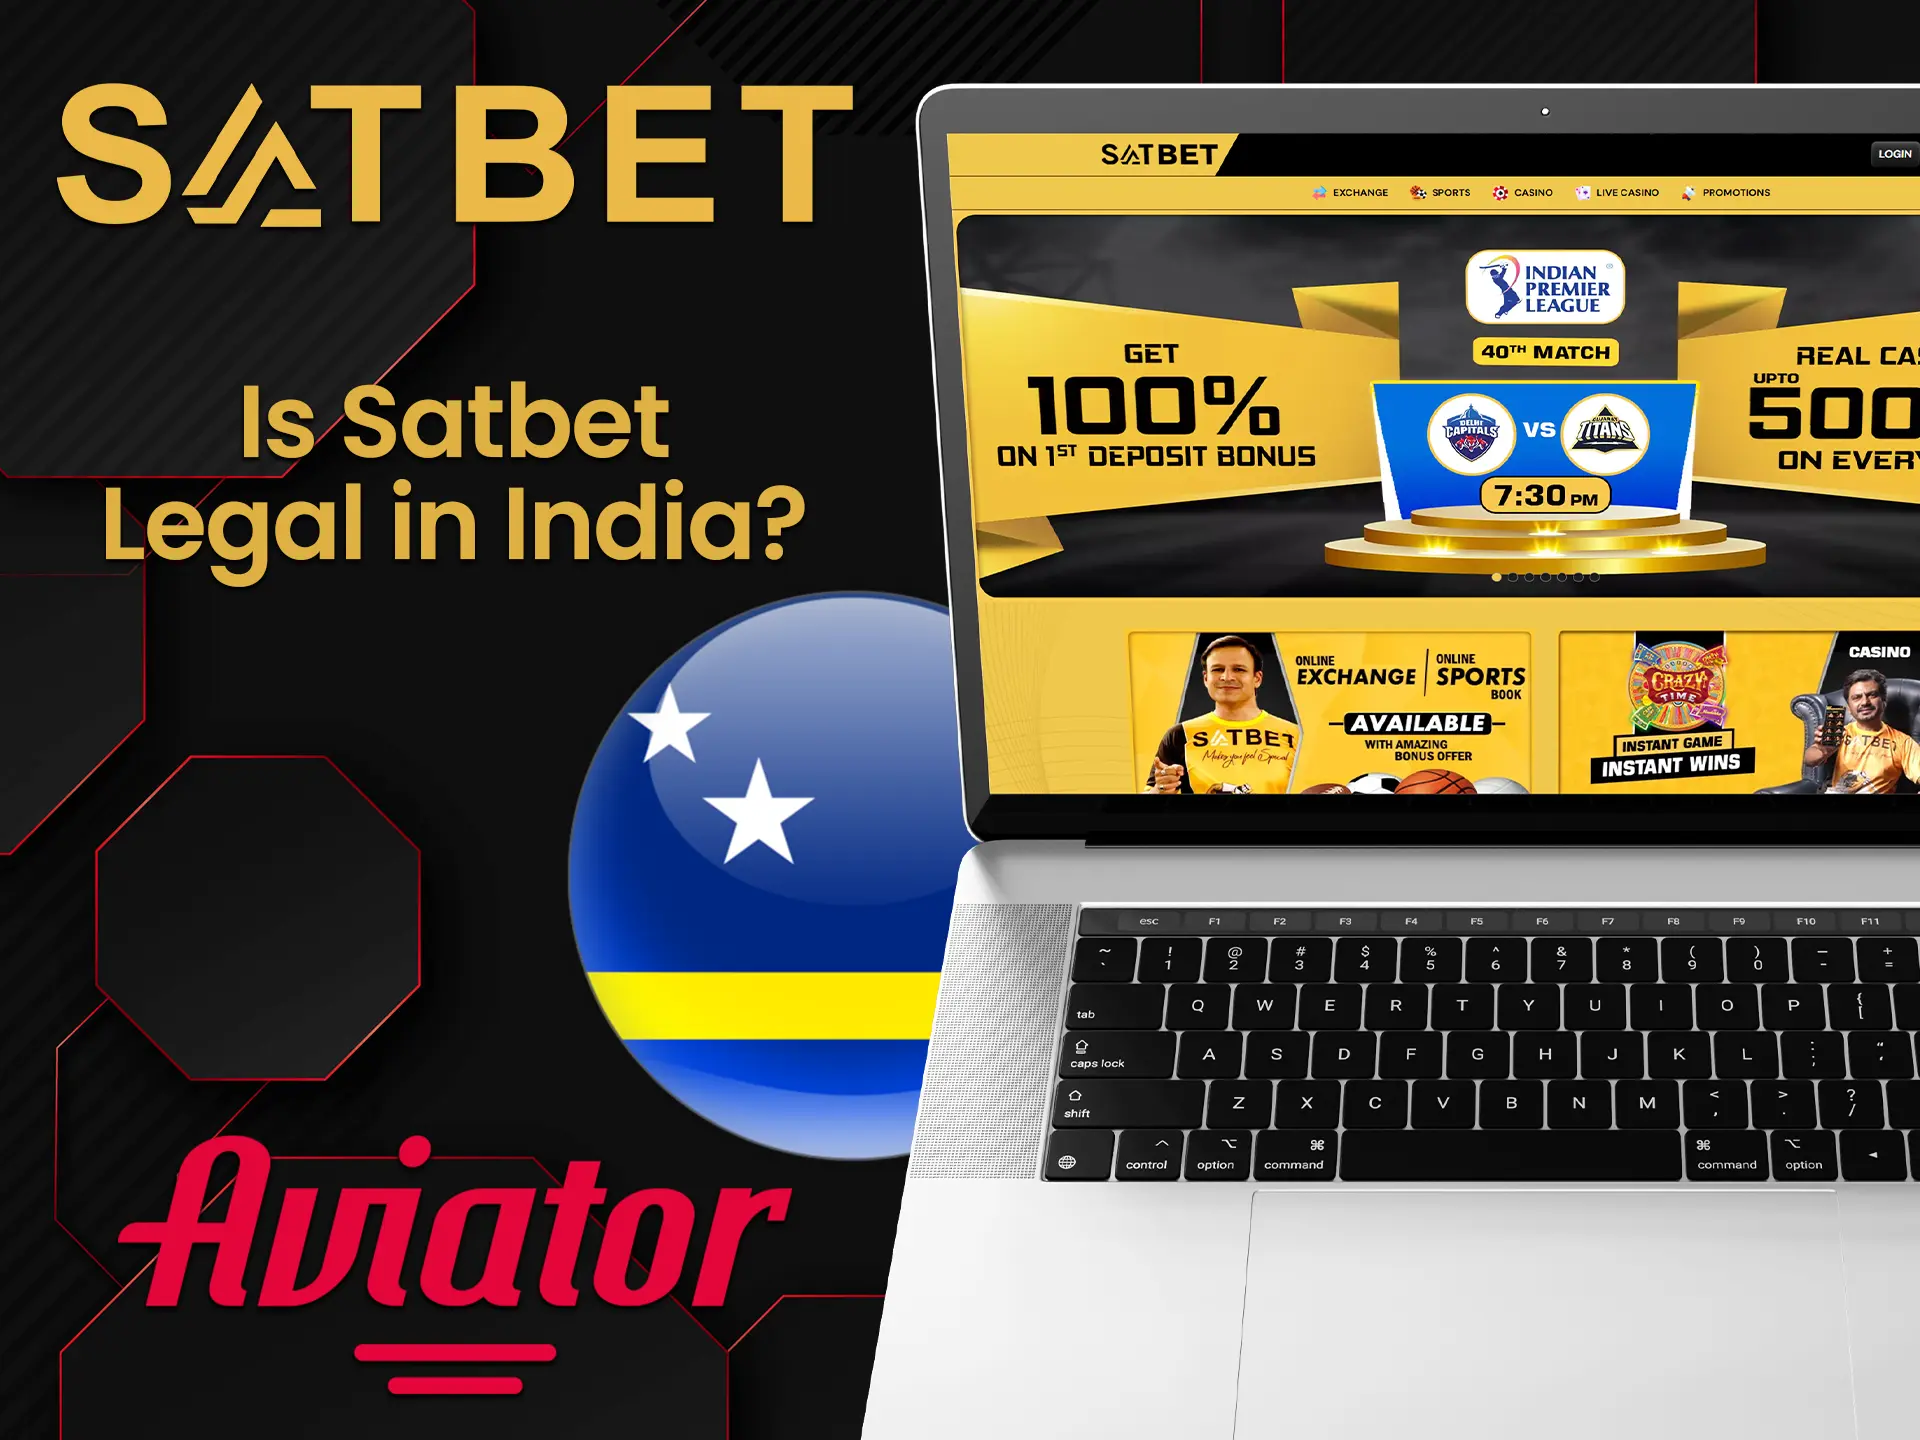 Satbet operates under the Curaçao gambling license.